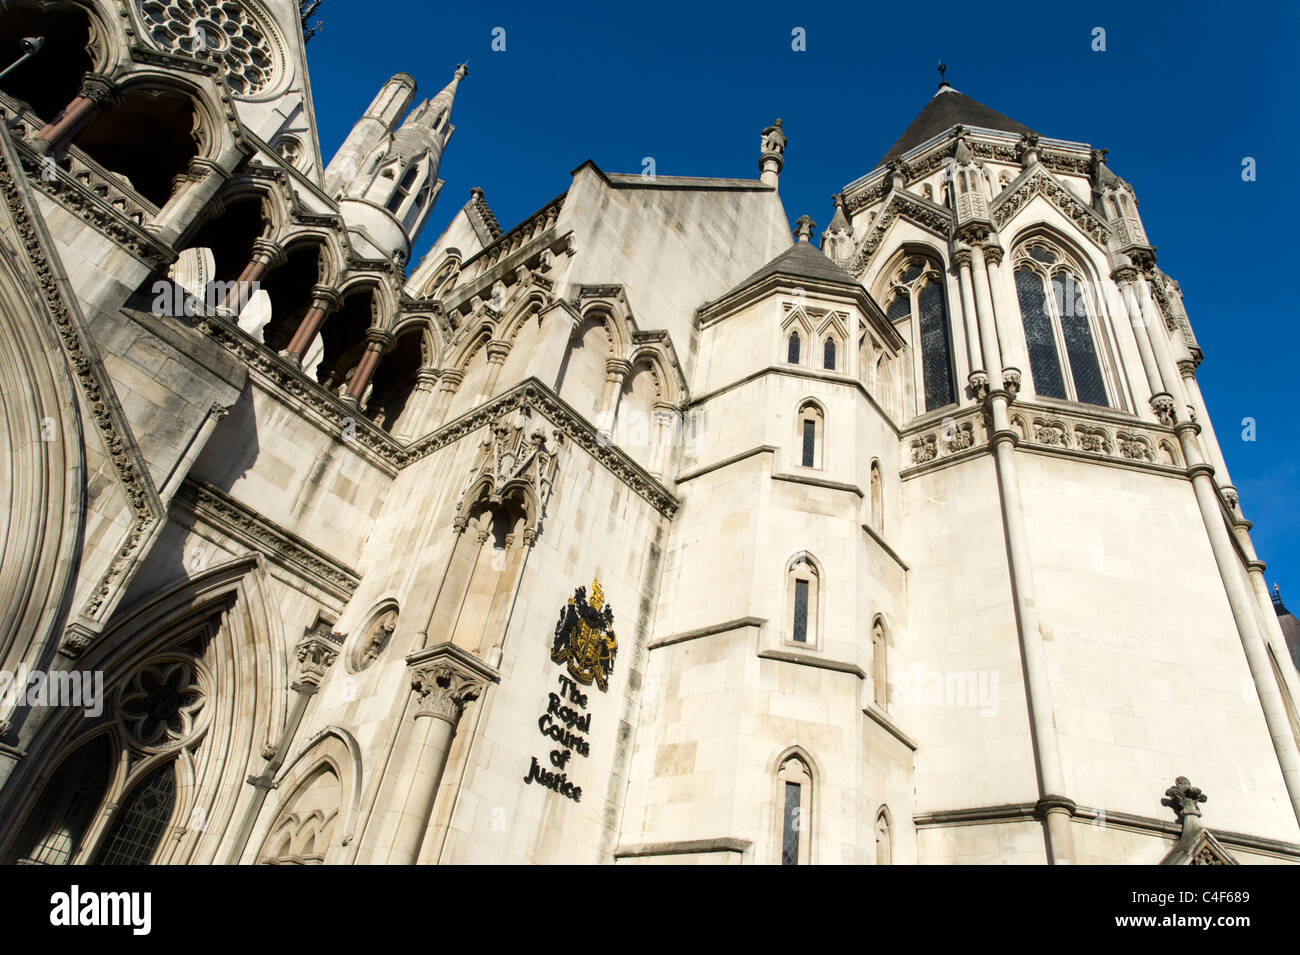 High Court of Justice, London, UK Stockfoto